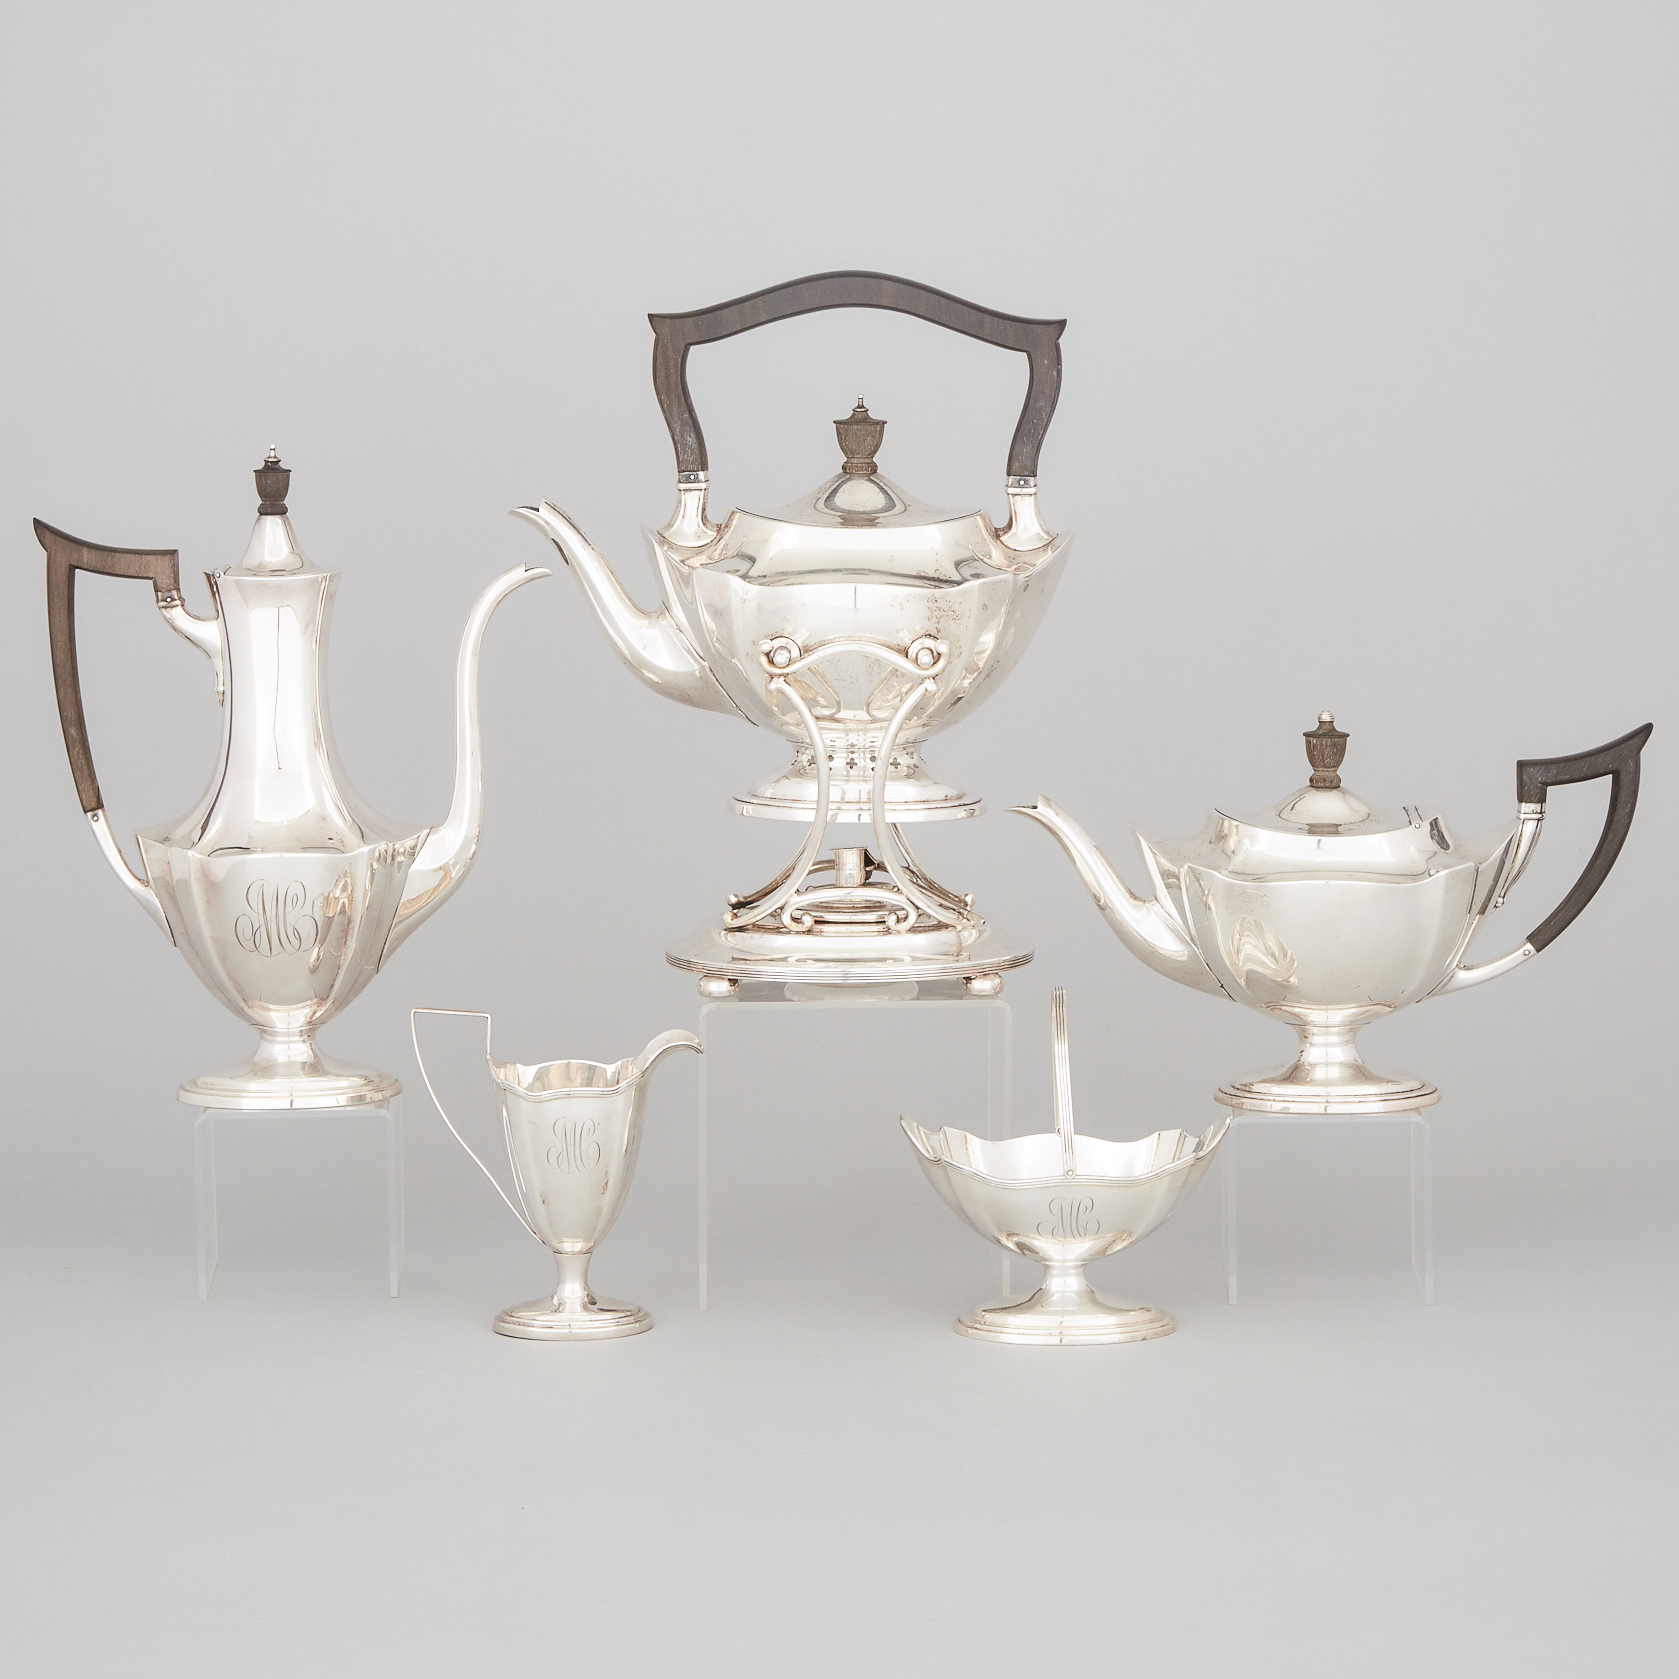 American Silver Tea and Coffee Service, Gorham Mfg. Co., Providence, R.I., 1902/03